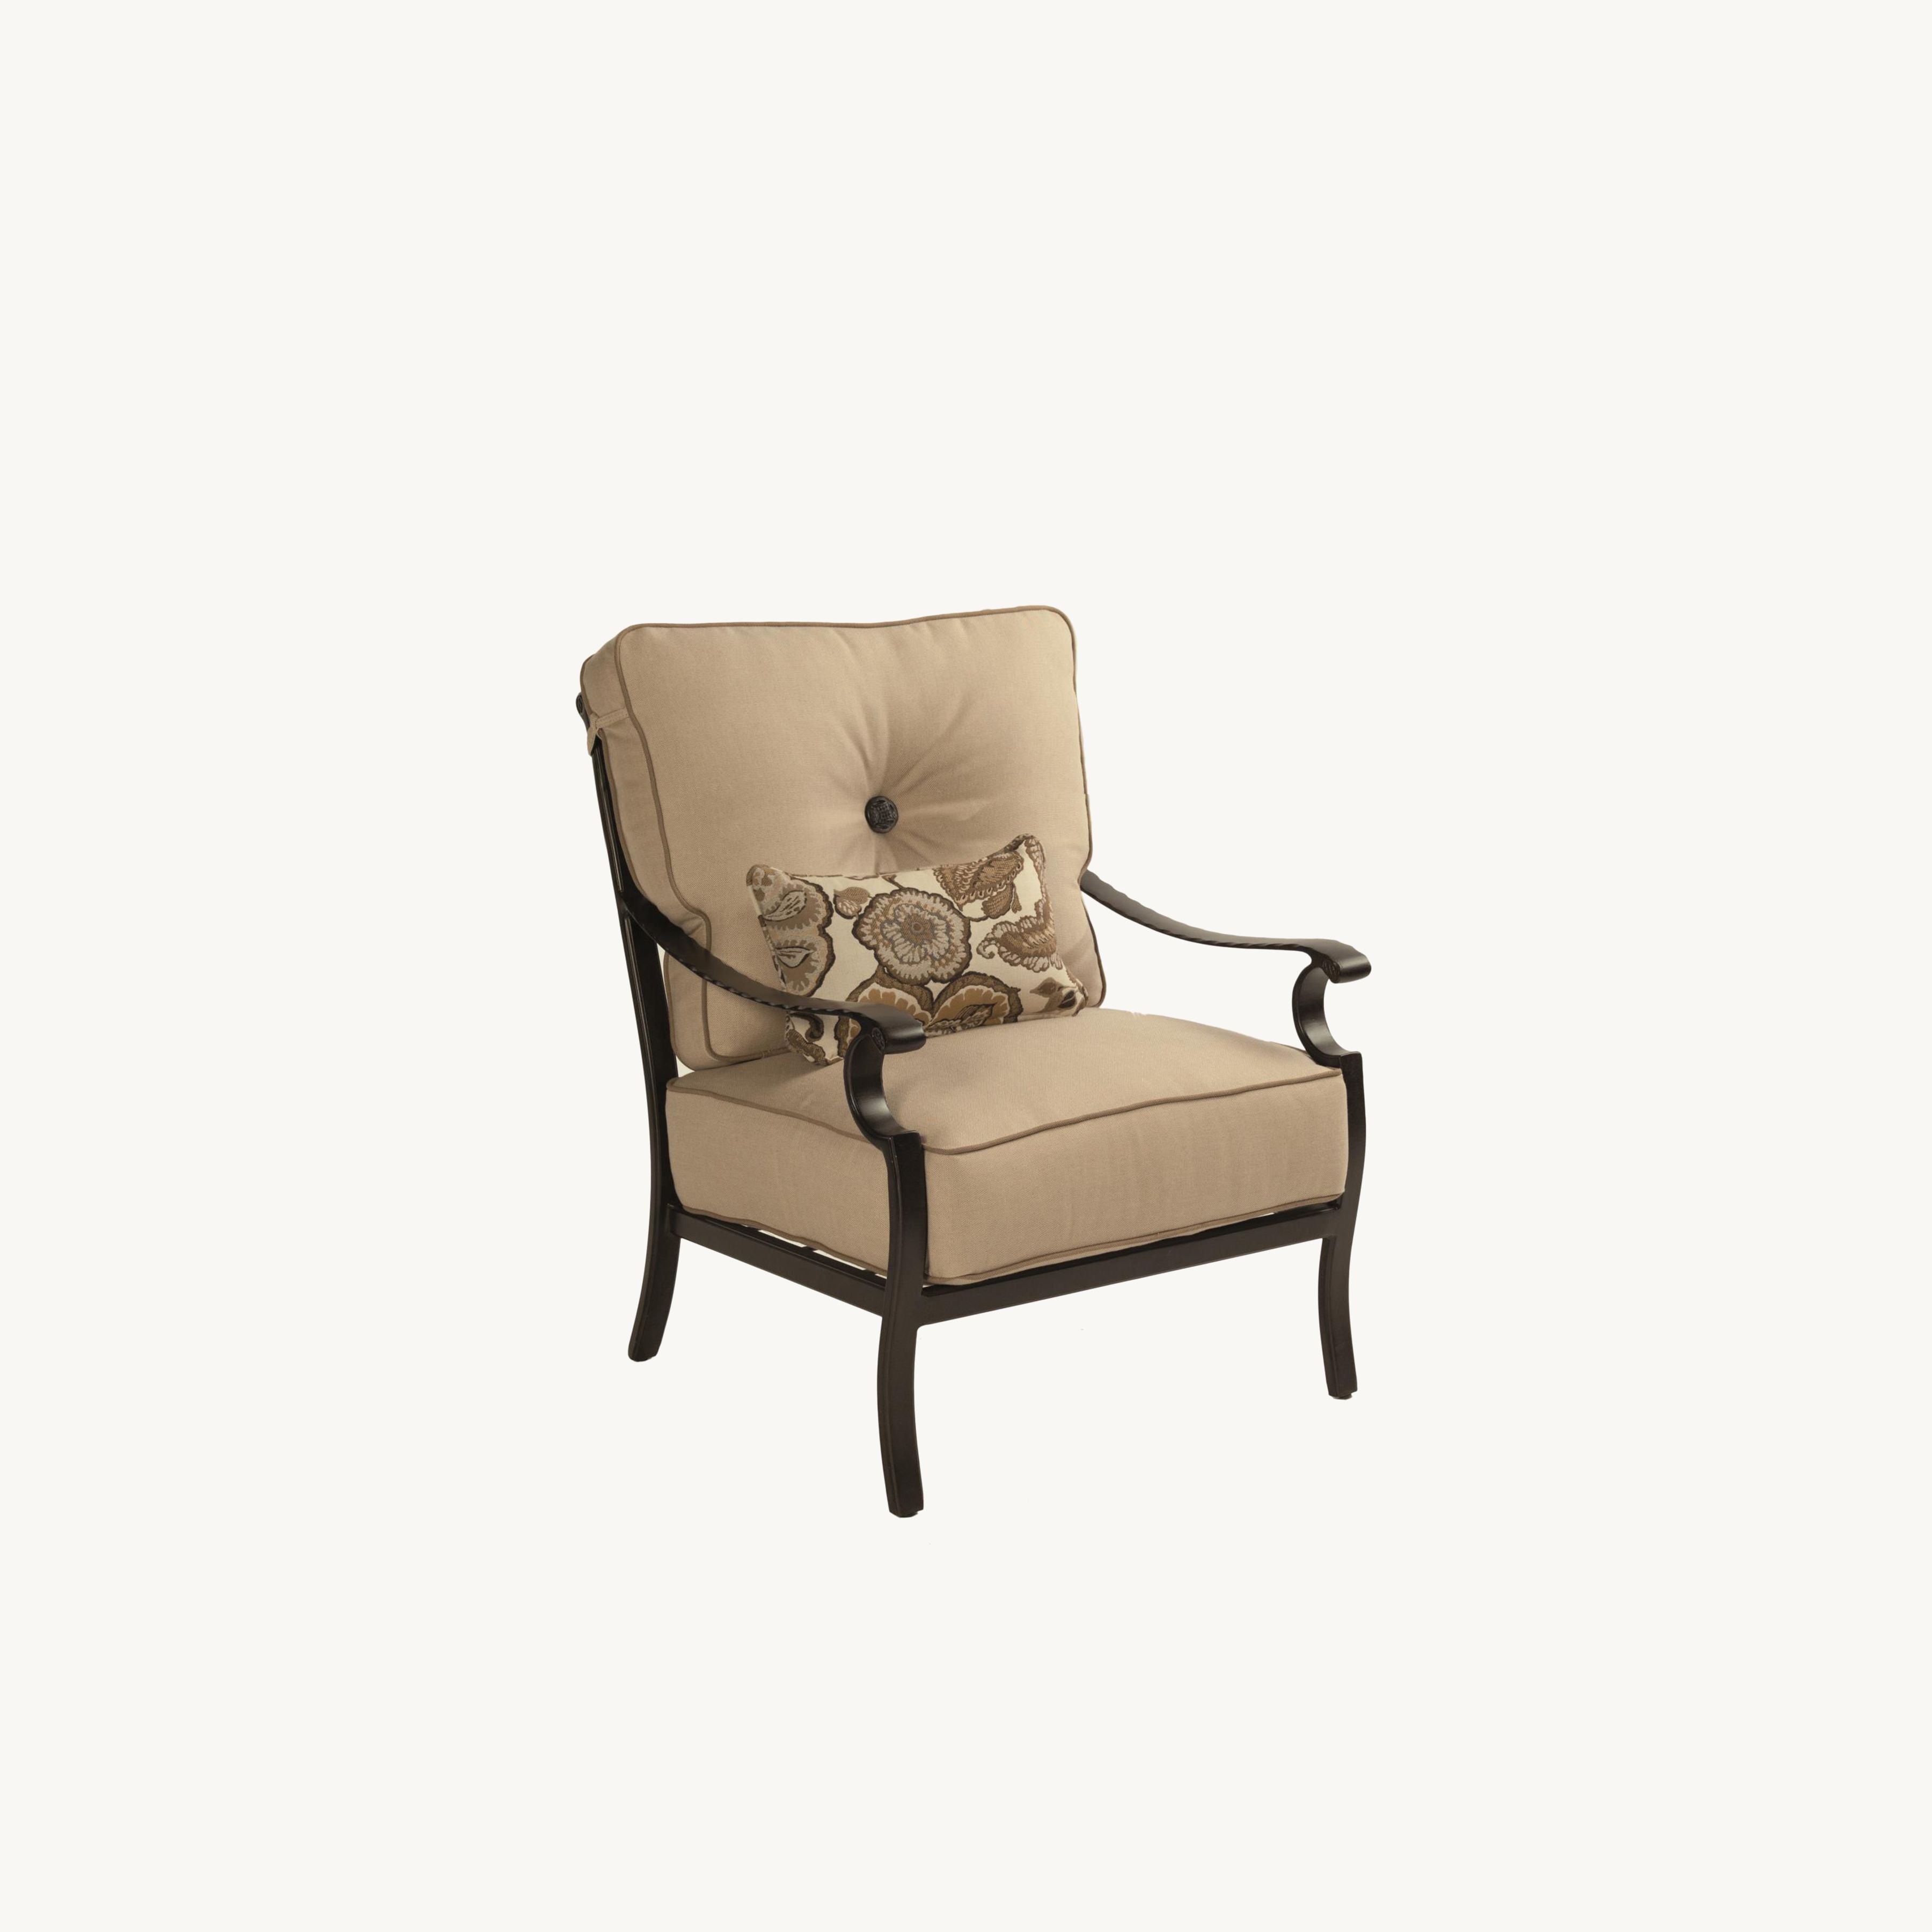 Monterey High Back Cushioned Lounge Chair By Castelle